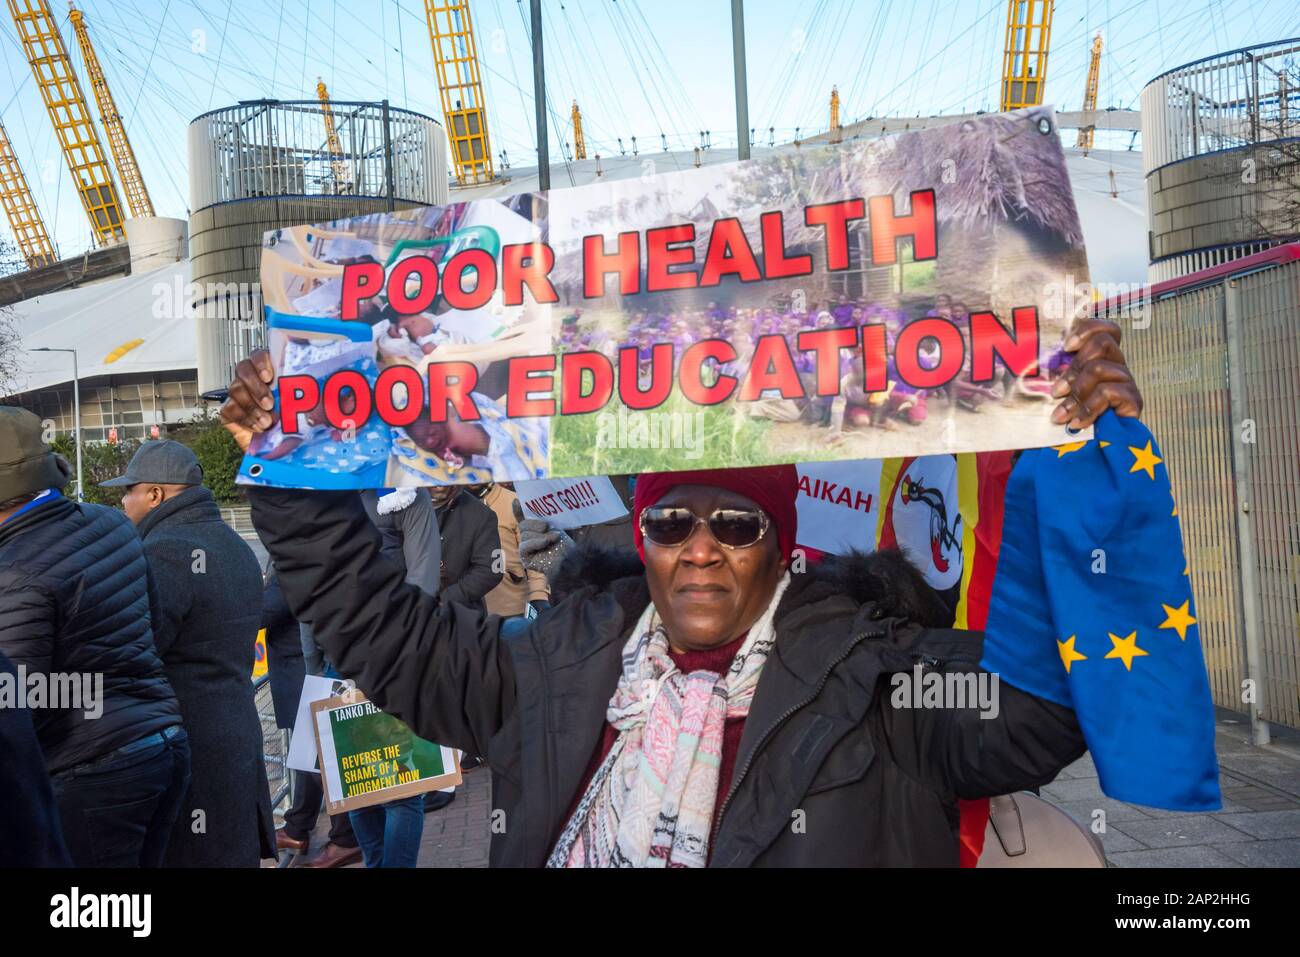 London, UK. 20th January 2020. Ugandans protest against President Yoweri Museveni at the UK-Africa Investment Summit in North Greenwich. Museveni has been in office since 1986, overturning the constitution allowing only two terms in office and has pushed through an act removing the age cap and increasing the term of office from 5 to 7 years for next year's elections. This has led to widespread protests inside his own party and by the opposition. The country suffers from high levels of corruption, unemployment and poverty. Peter Marshall/Alamy Live News Stock Photo